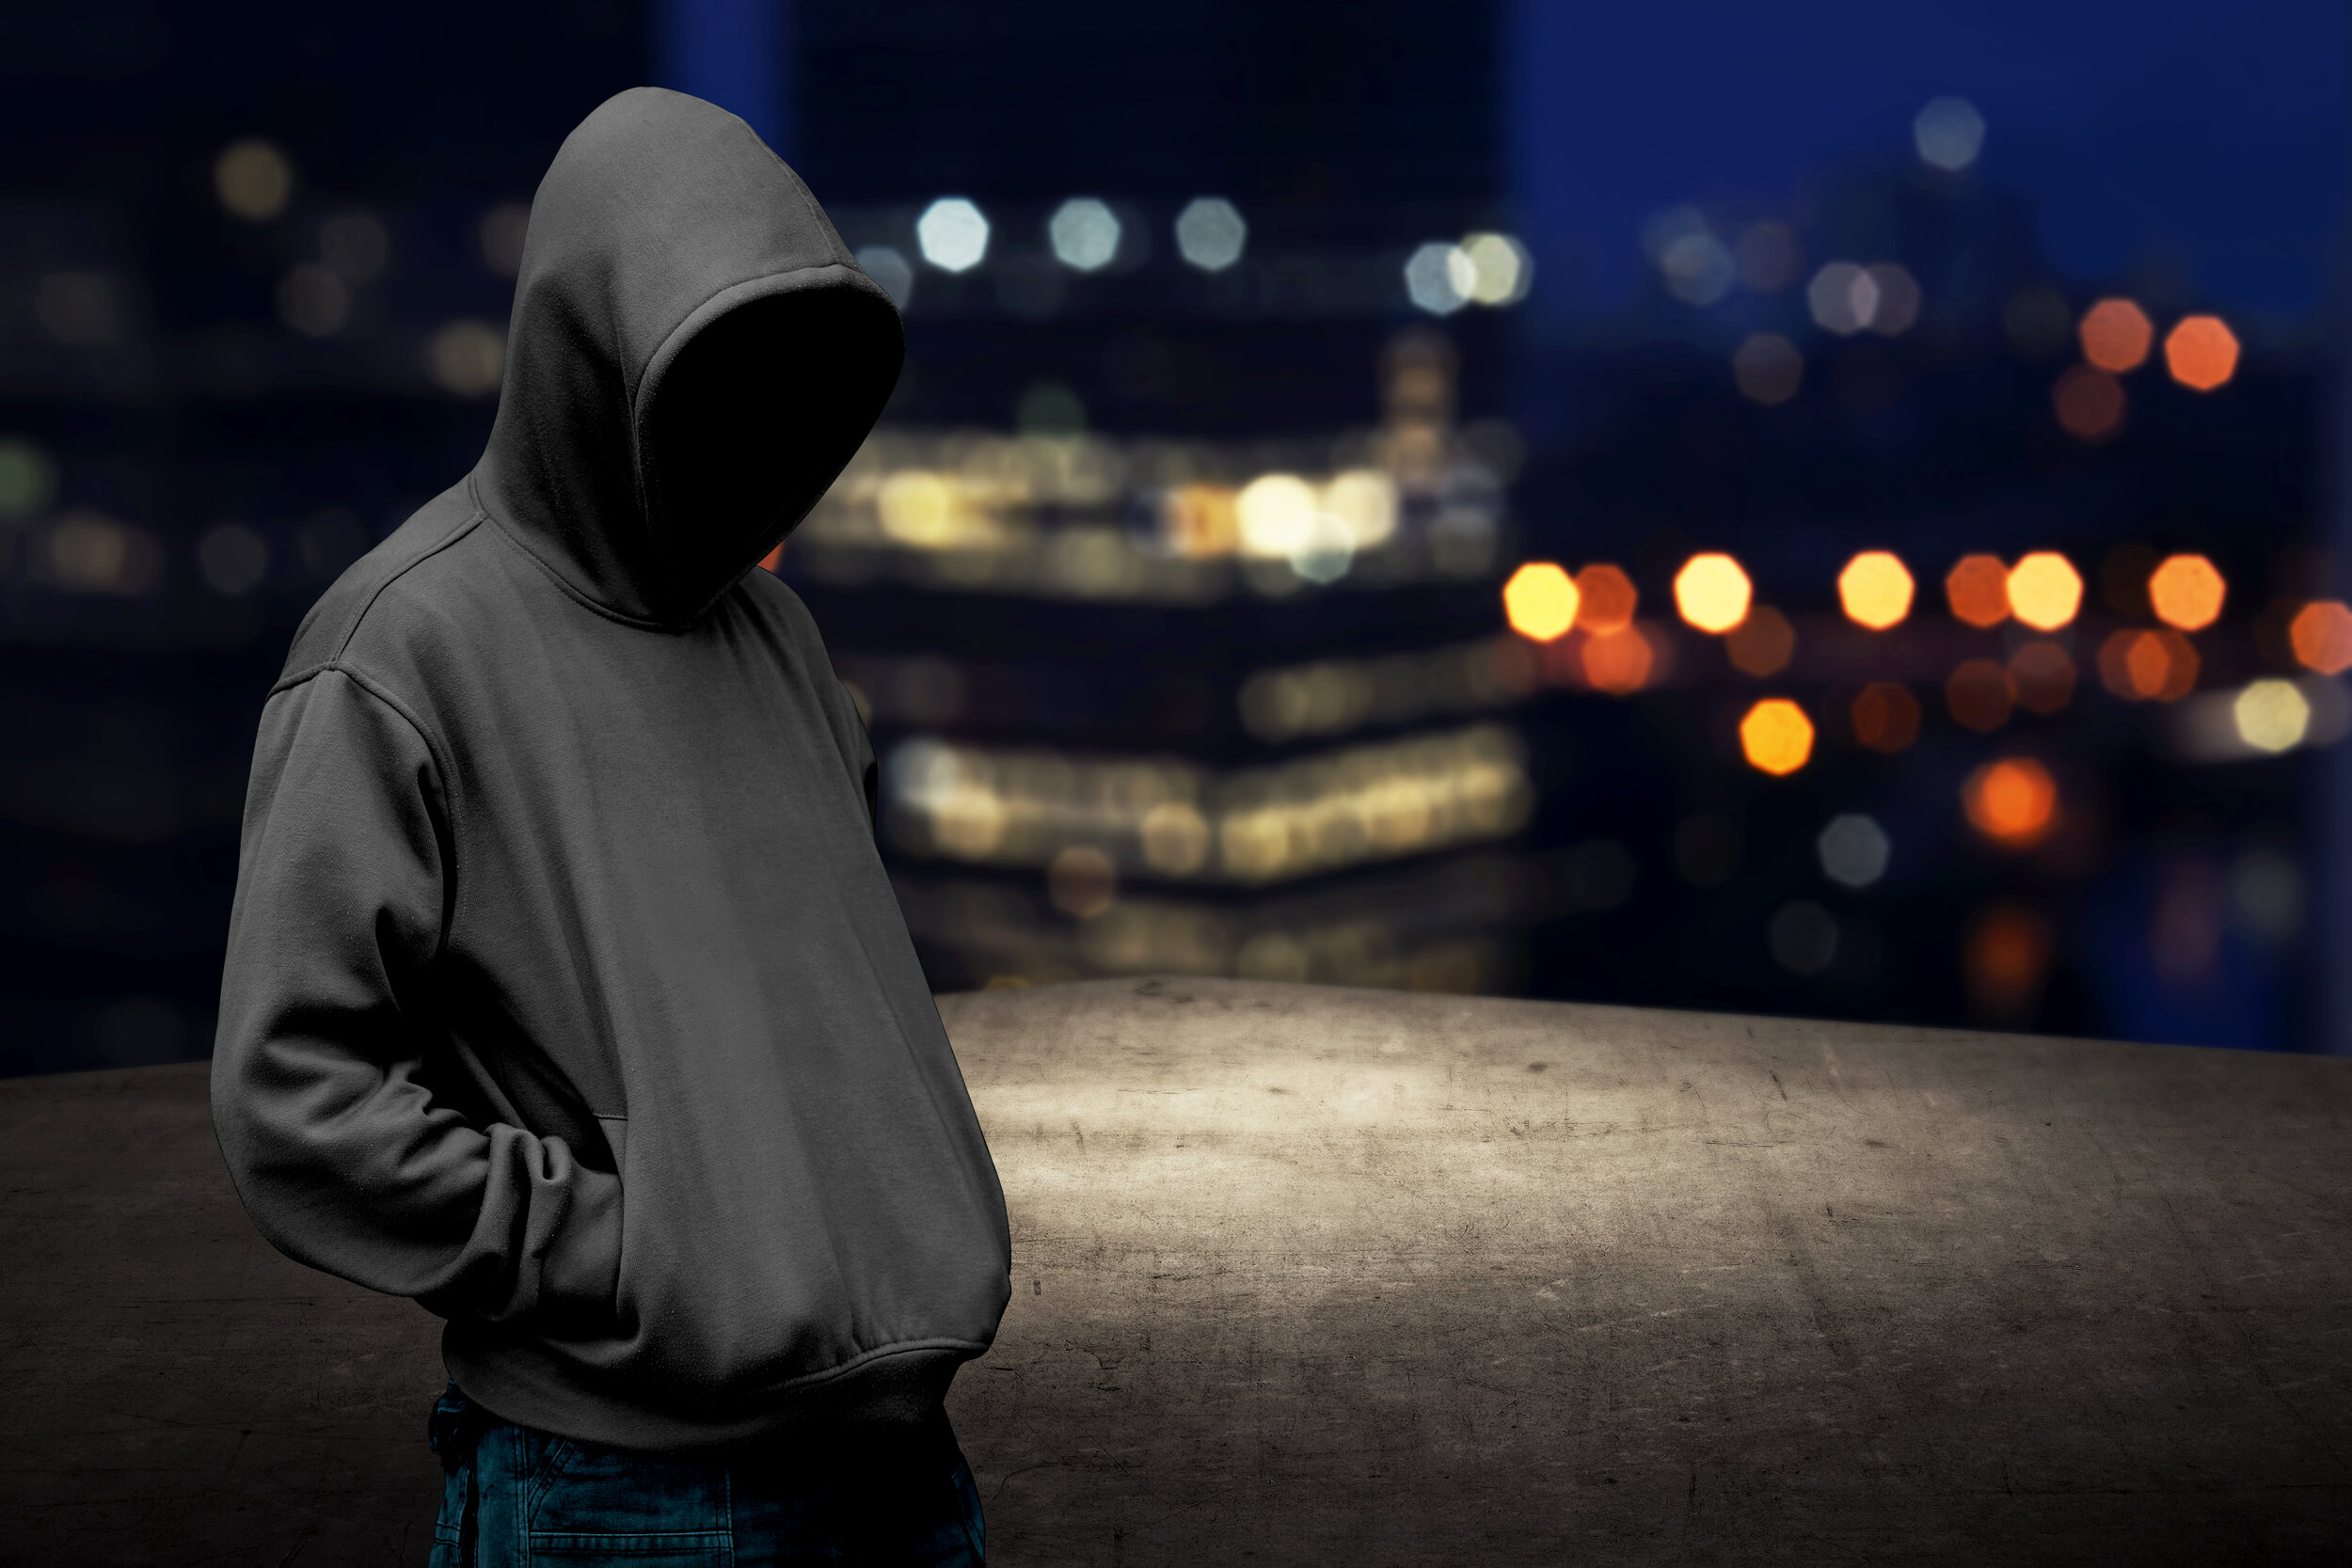 Faceless-man-in-hood-on-the-rooftop-486864098_6000x4000.jpeg